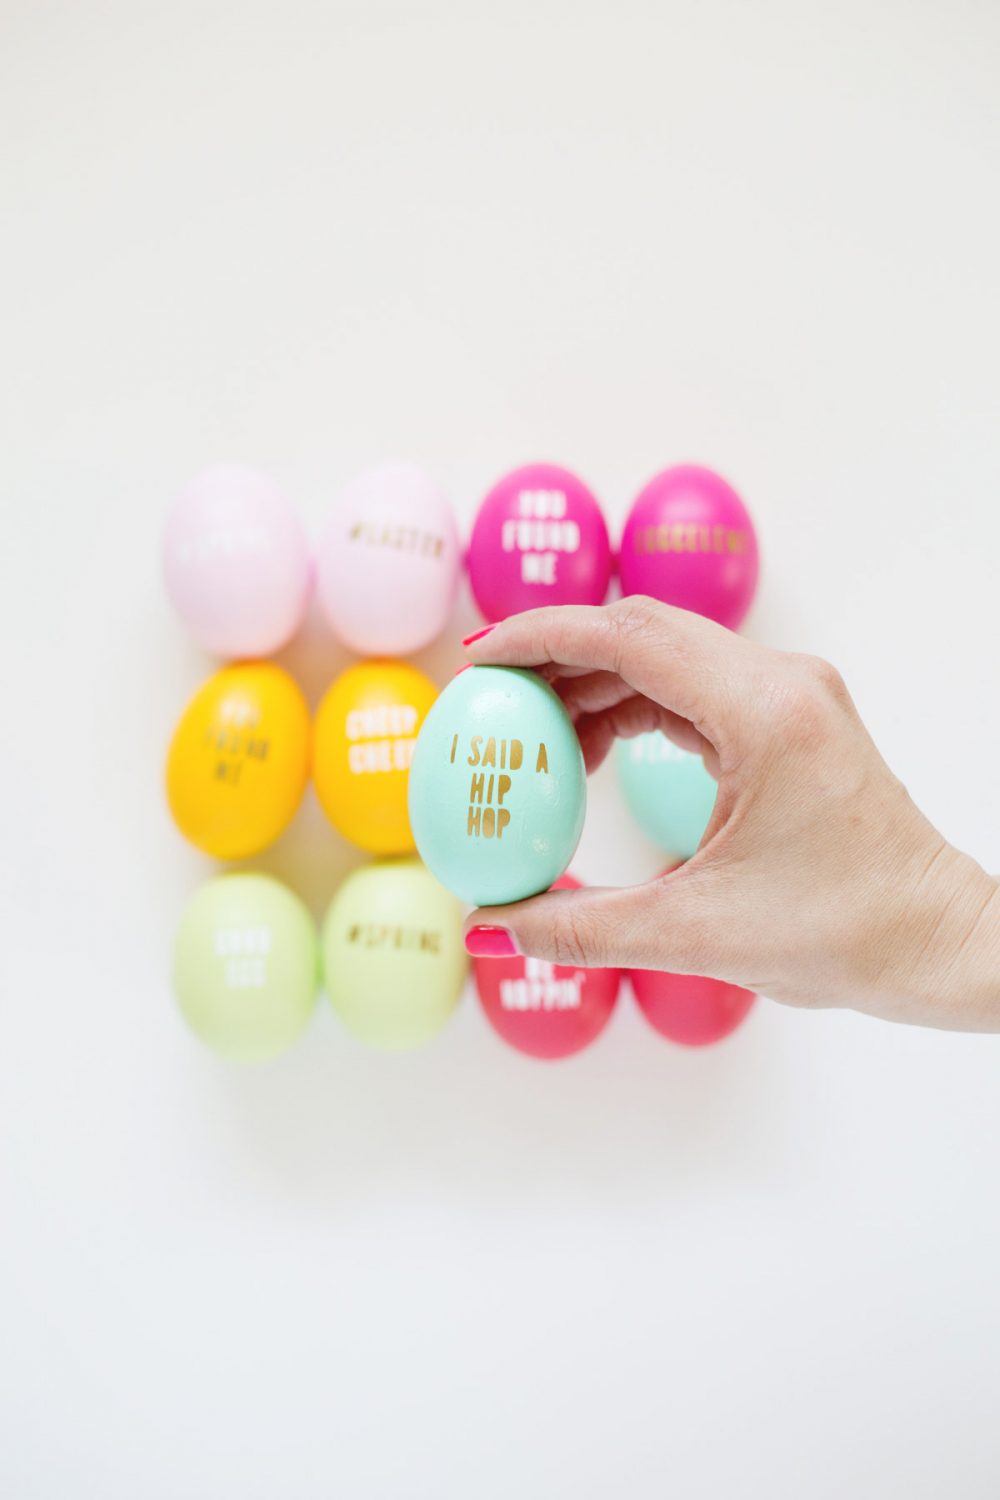 10 Adorable Easter Egg DIYs You Need to Try